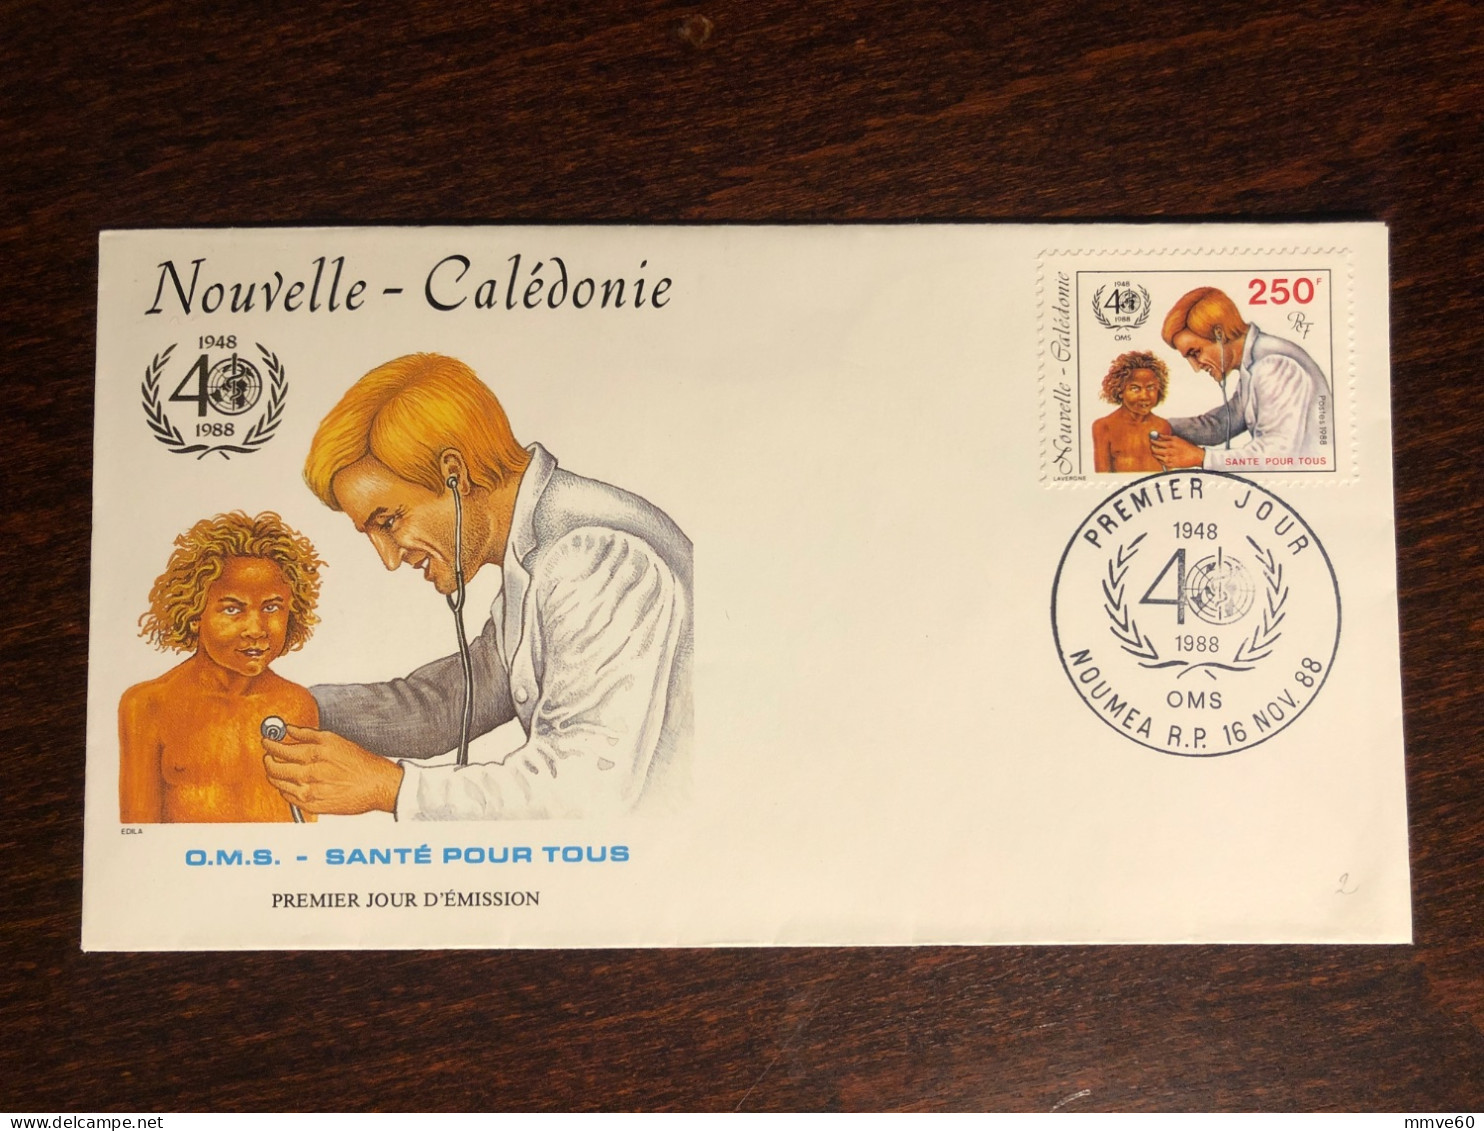 NEW CALEDONIA NOUVELLE CALEDONIE FDC COVER 1988 YEAR WHO HEALTH MEDICINE - Briefe U. Dokumente